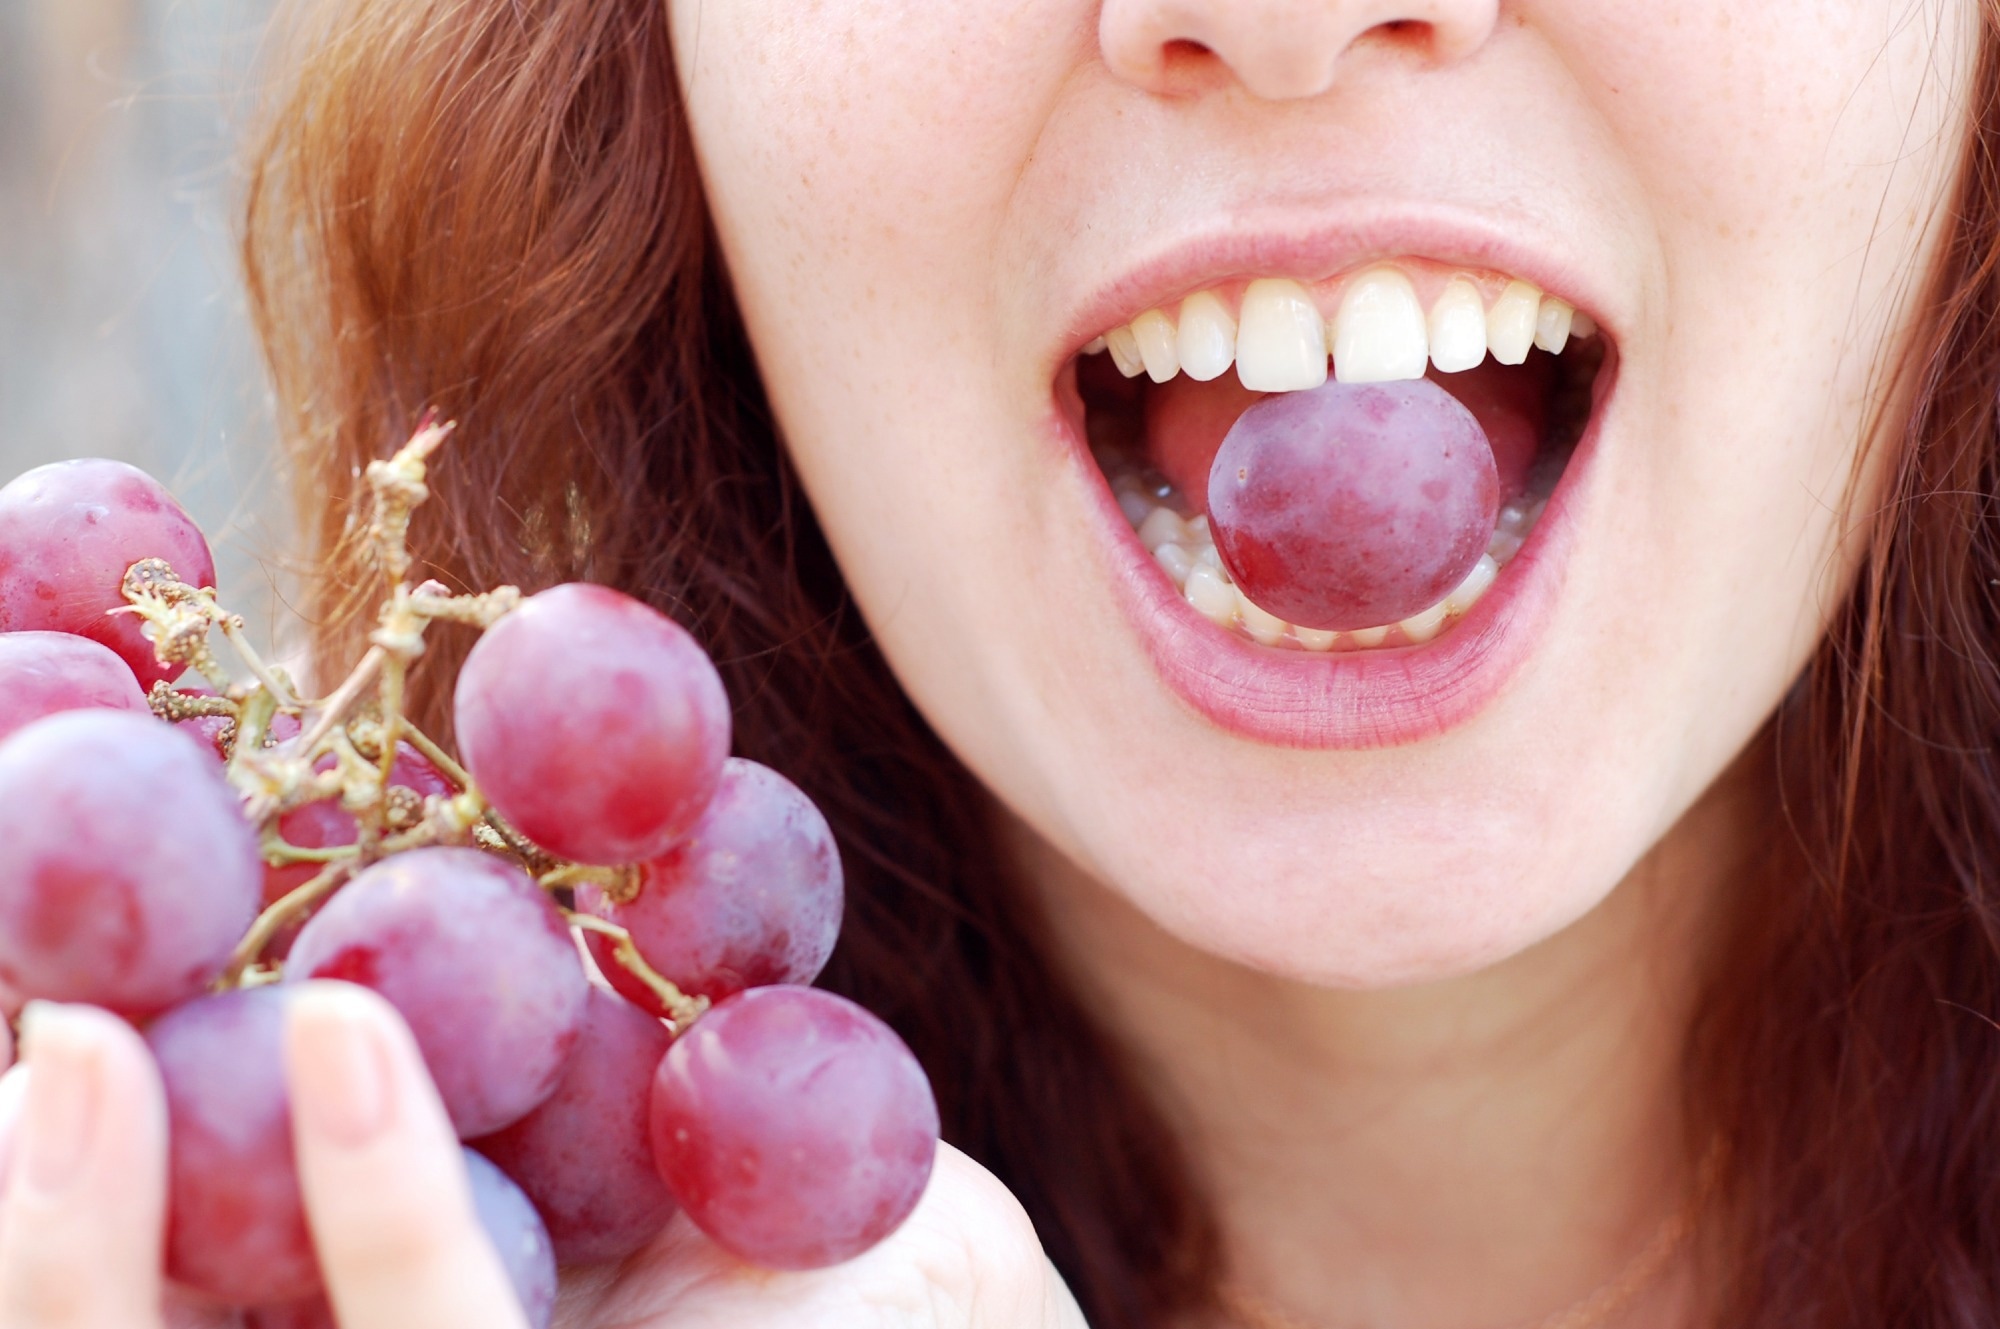 Study: Consumption of Grapes Modulates Gene Expression, Reduces Non-Alcoholic Fatty Liver Disease, and Extends Longevity in Female C57BL/6J Mice Provided with a High-Fat Western-Pattern Diet. Image Credit: EduardSV / Shutterstock